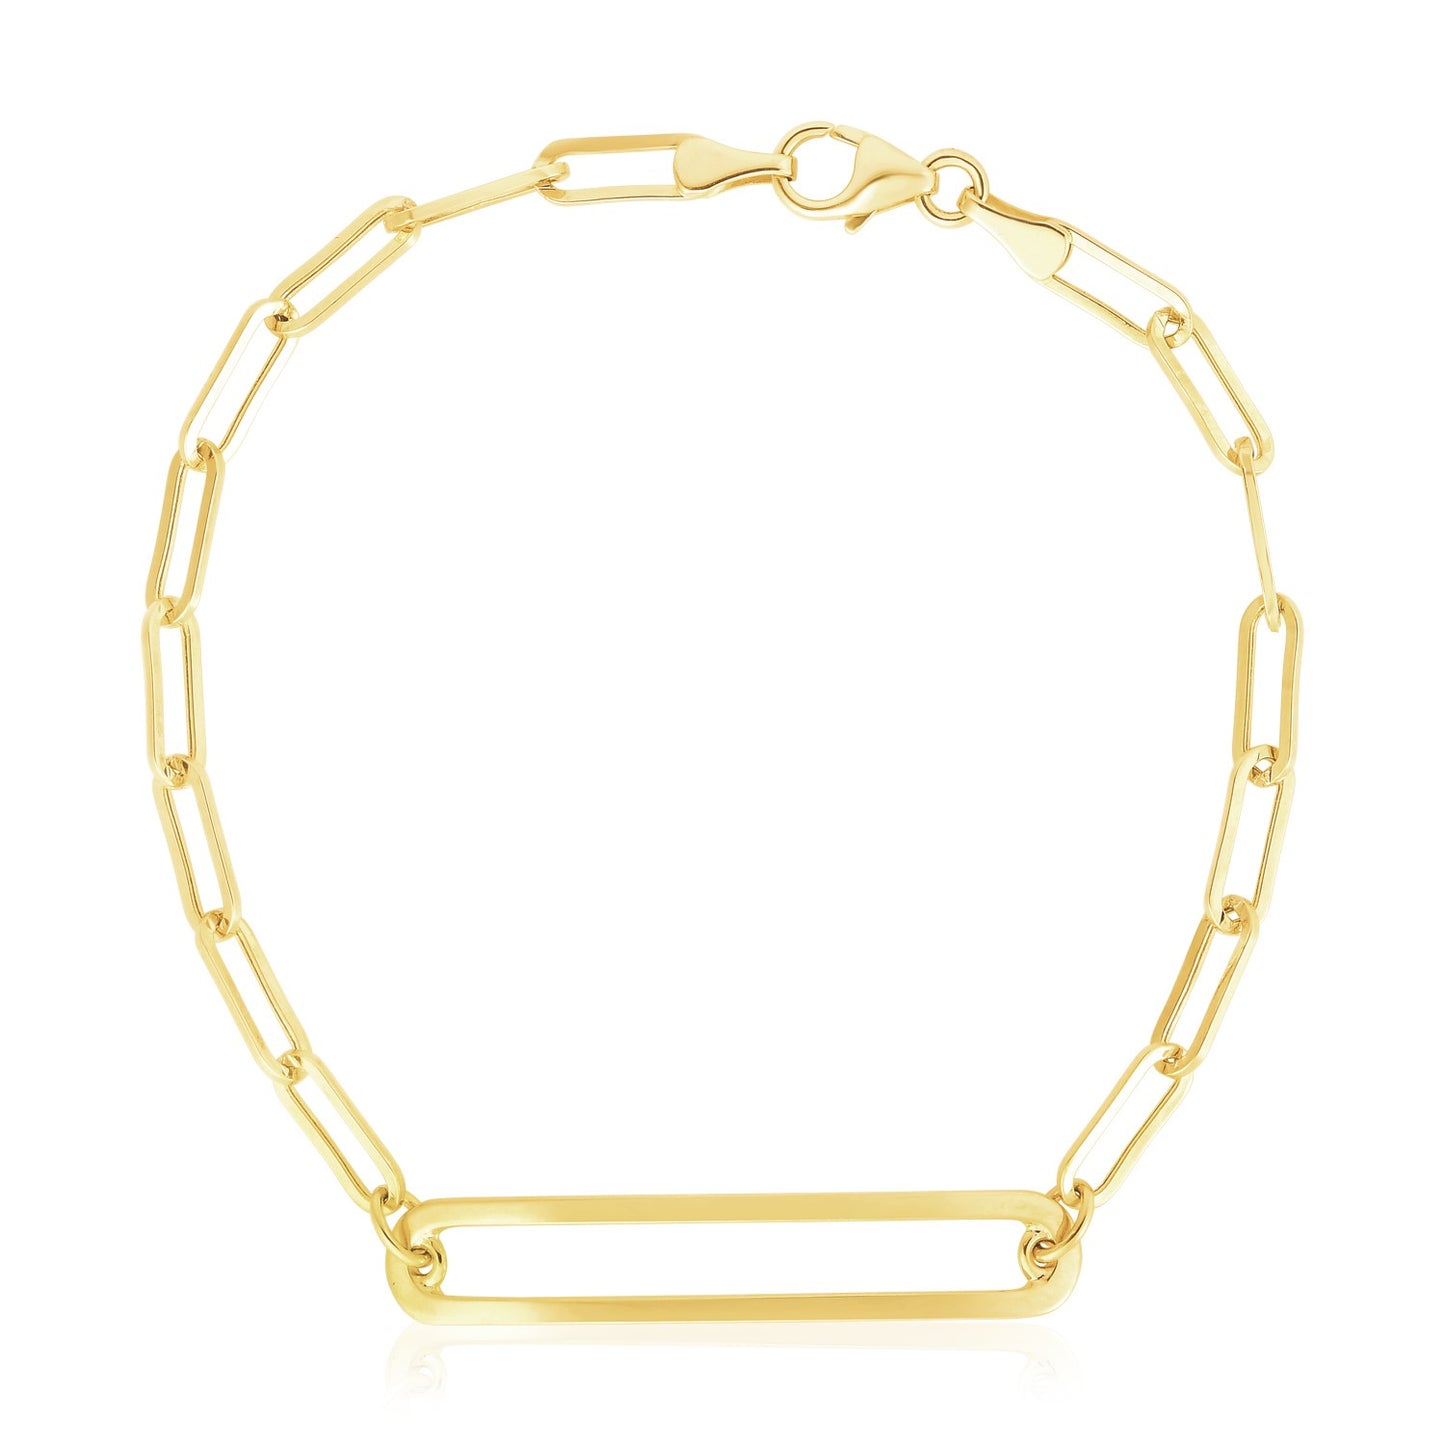 14k Yellow Gold High Polish Open Curved Paperclip Necklace